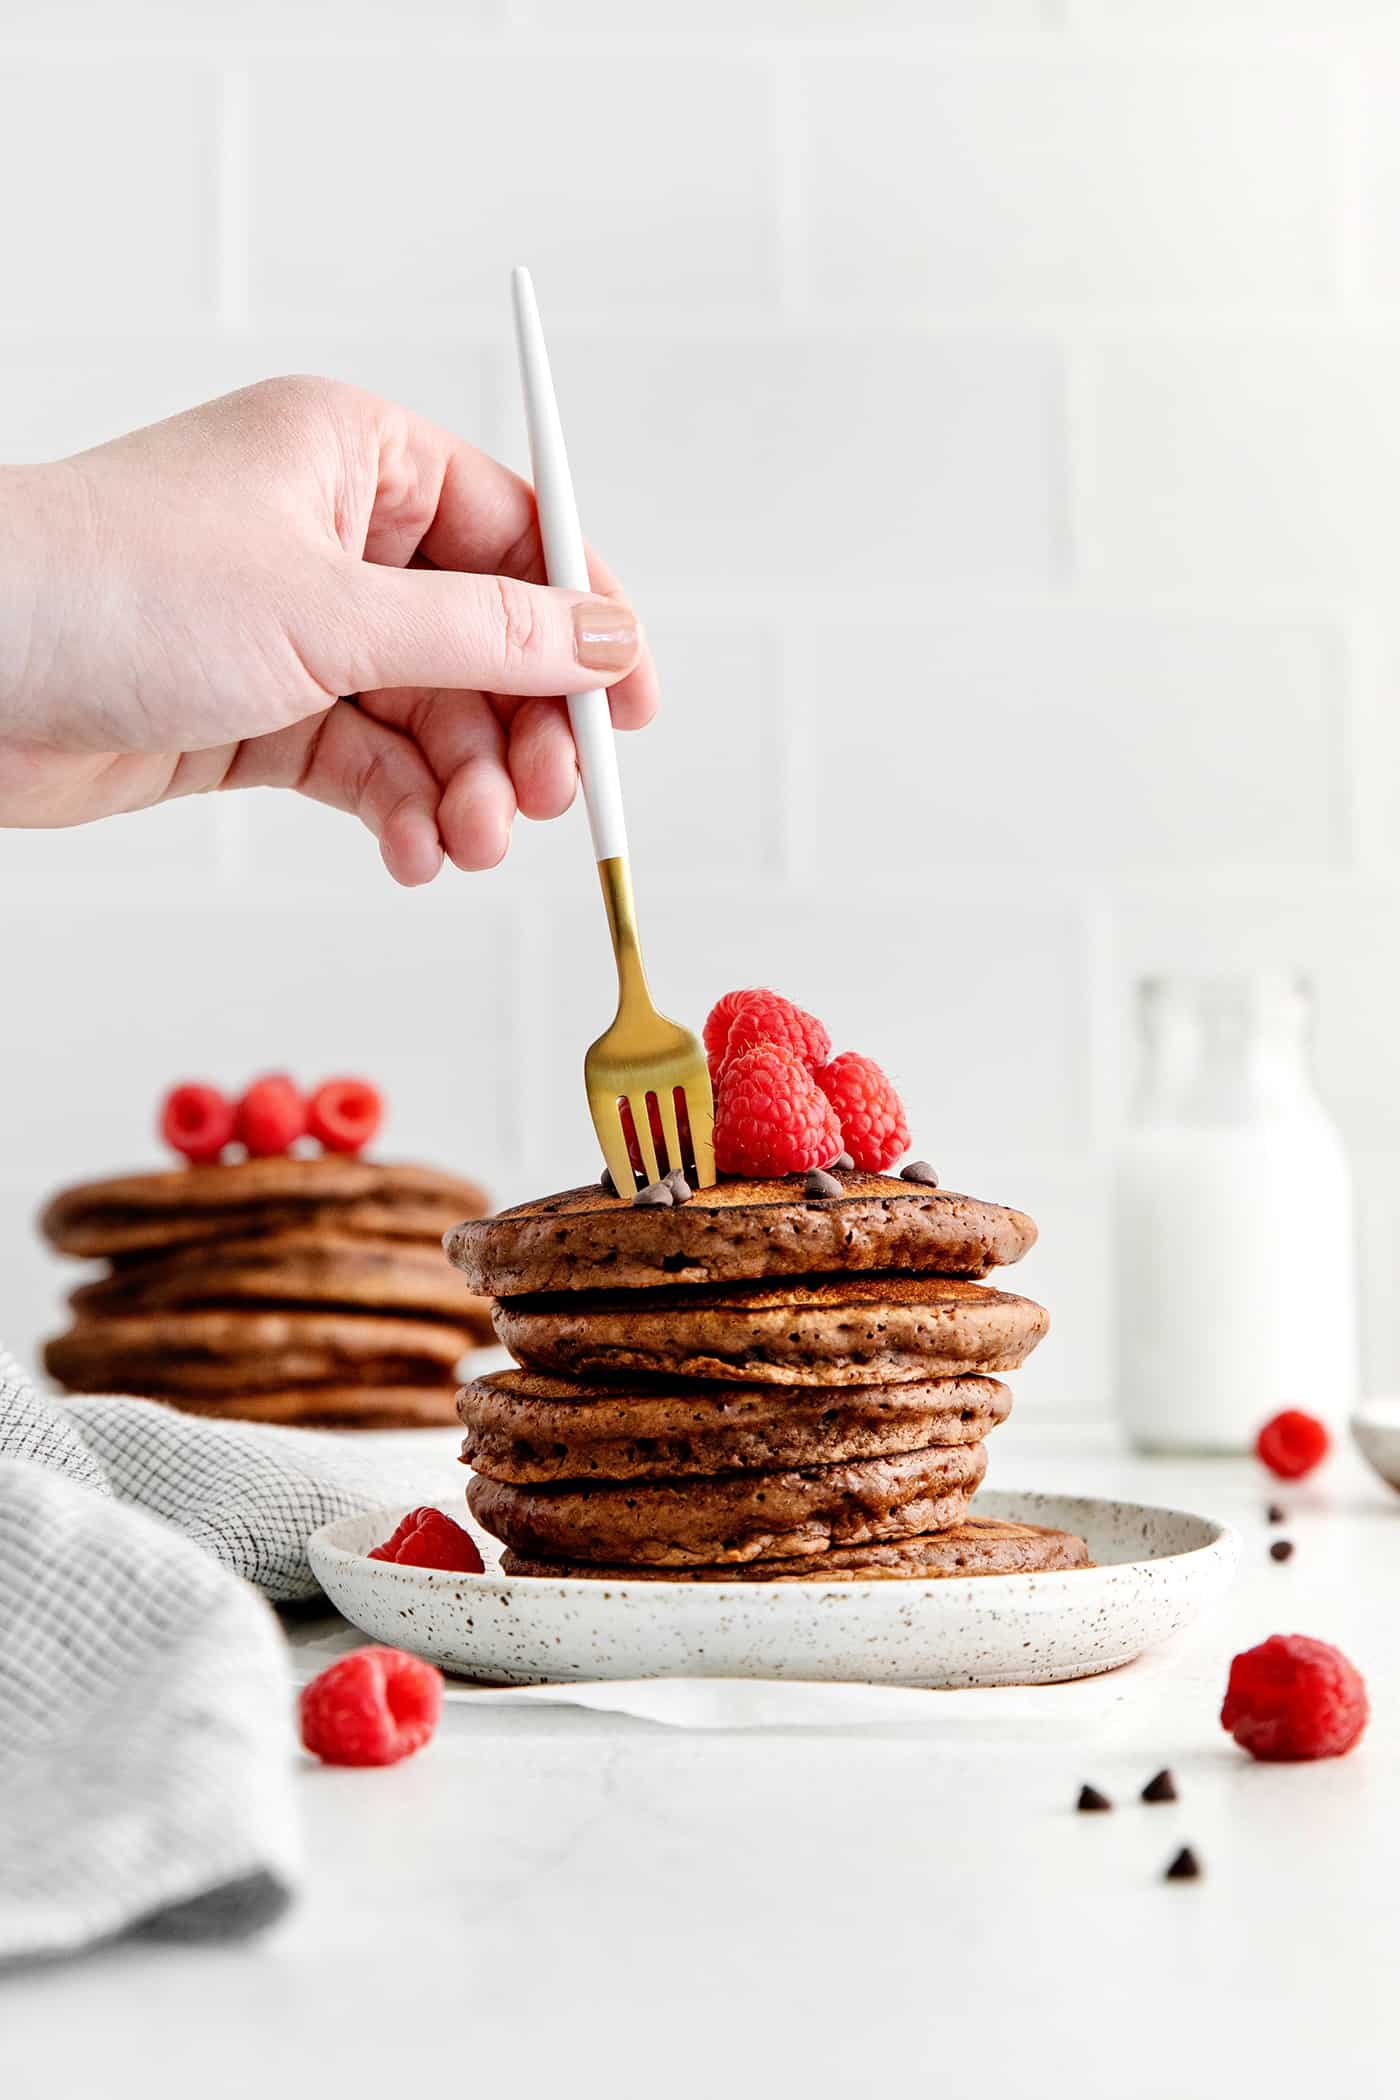 A fork diving into a stack of chocolate pancakes